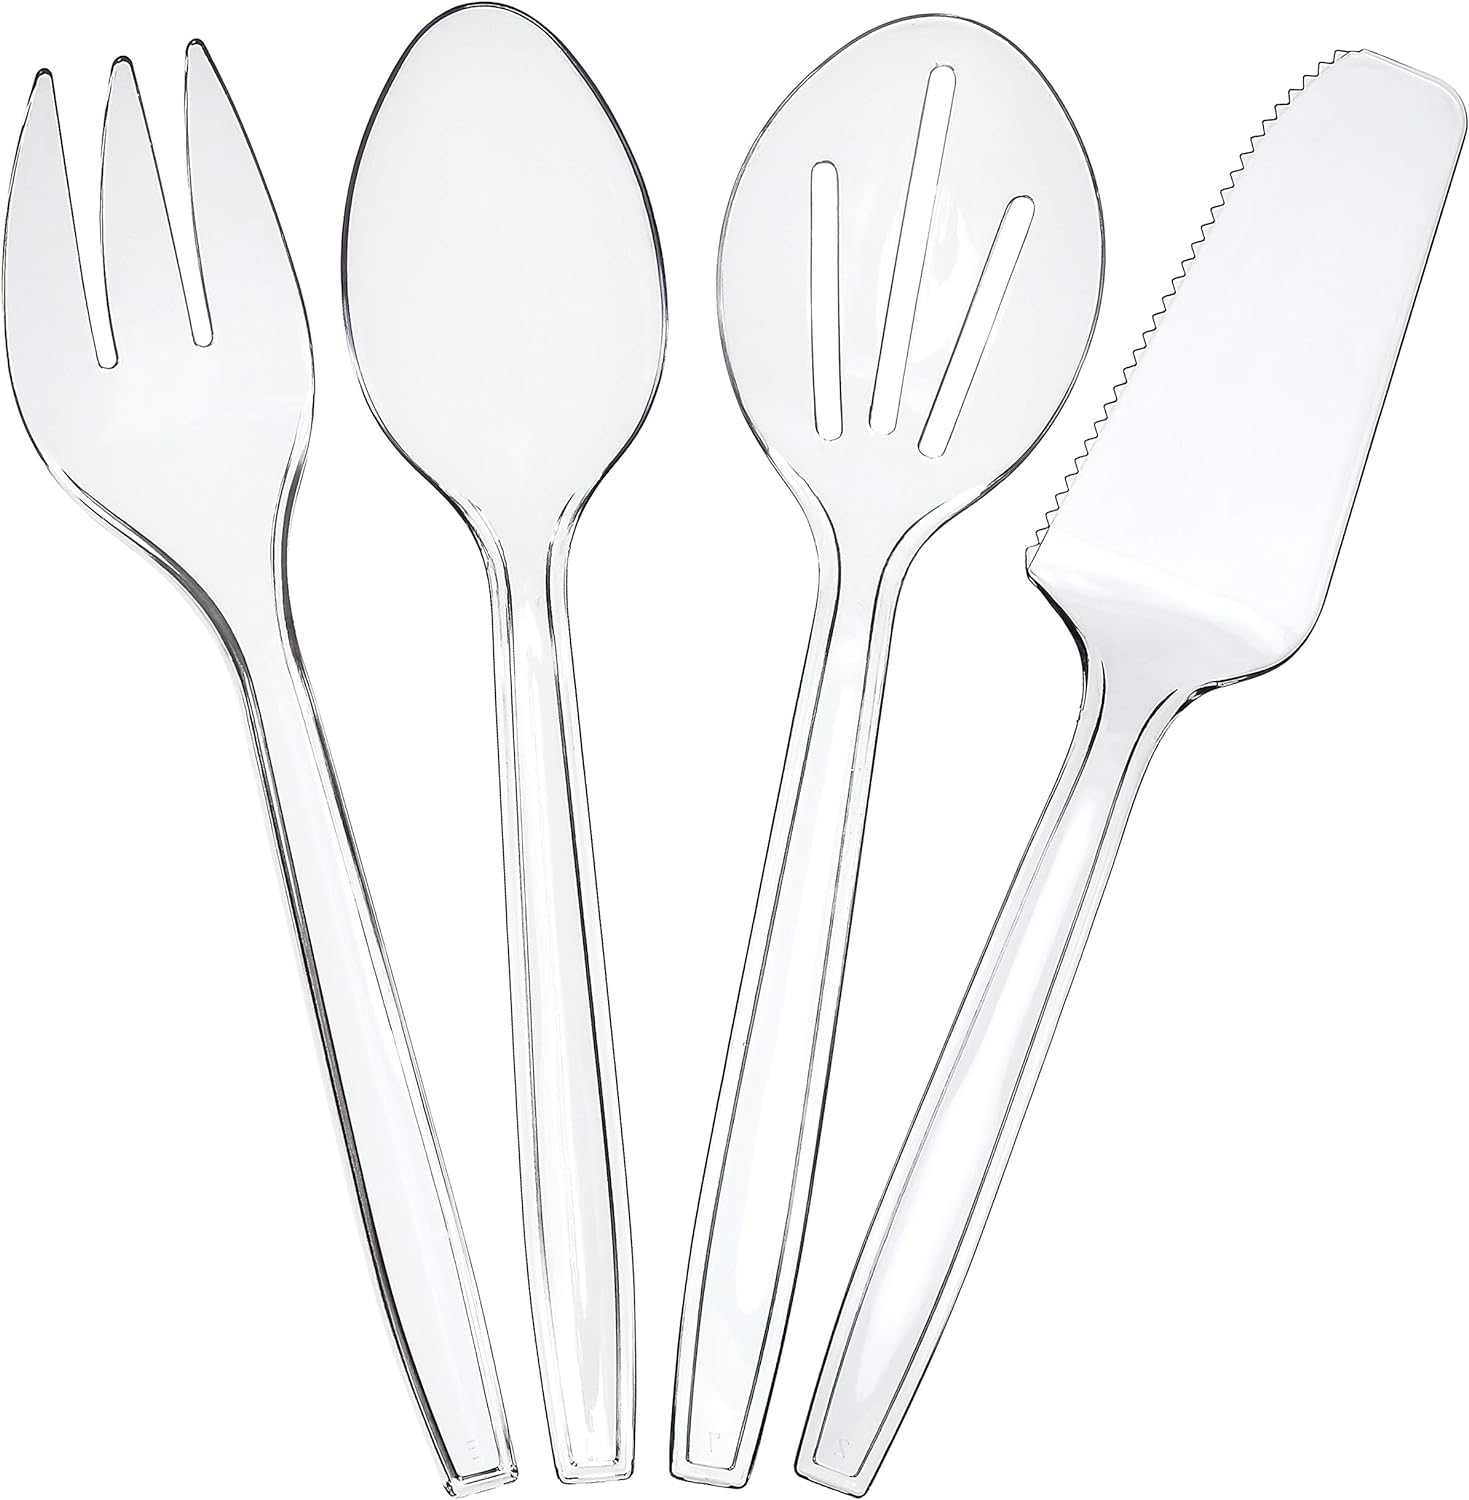 Plasticpro Disposable Plastic Serving Utensils Set of 36 9 Spoons, 9 Forks 9 Knives, 9 Sifting Spoons, Clear Heavyweight